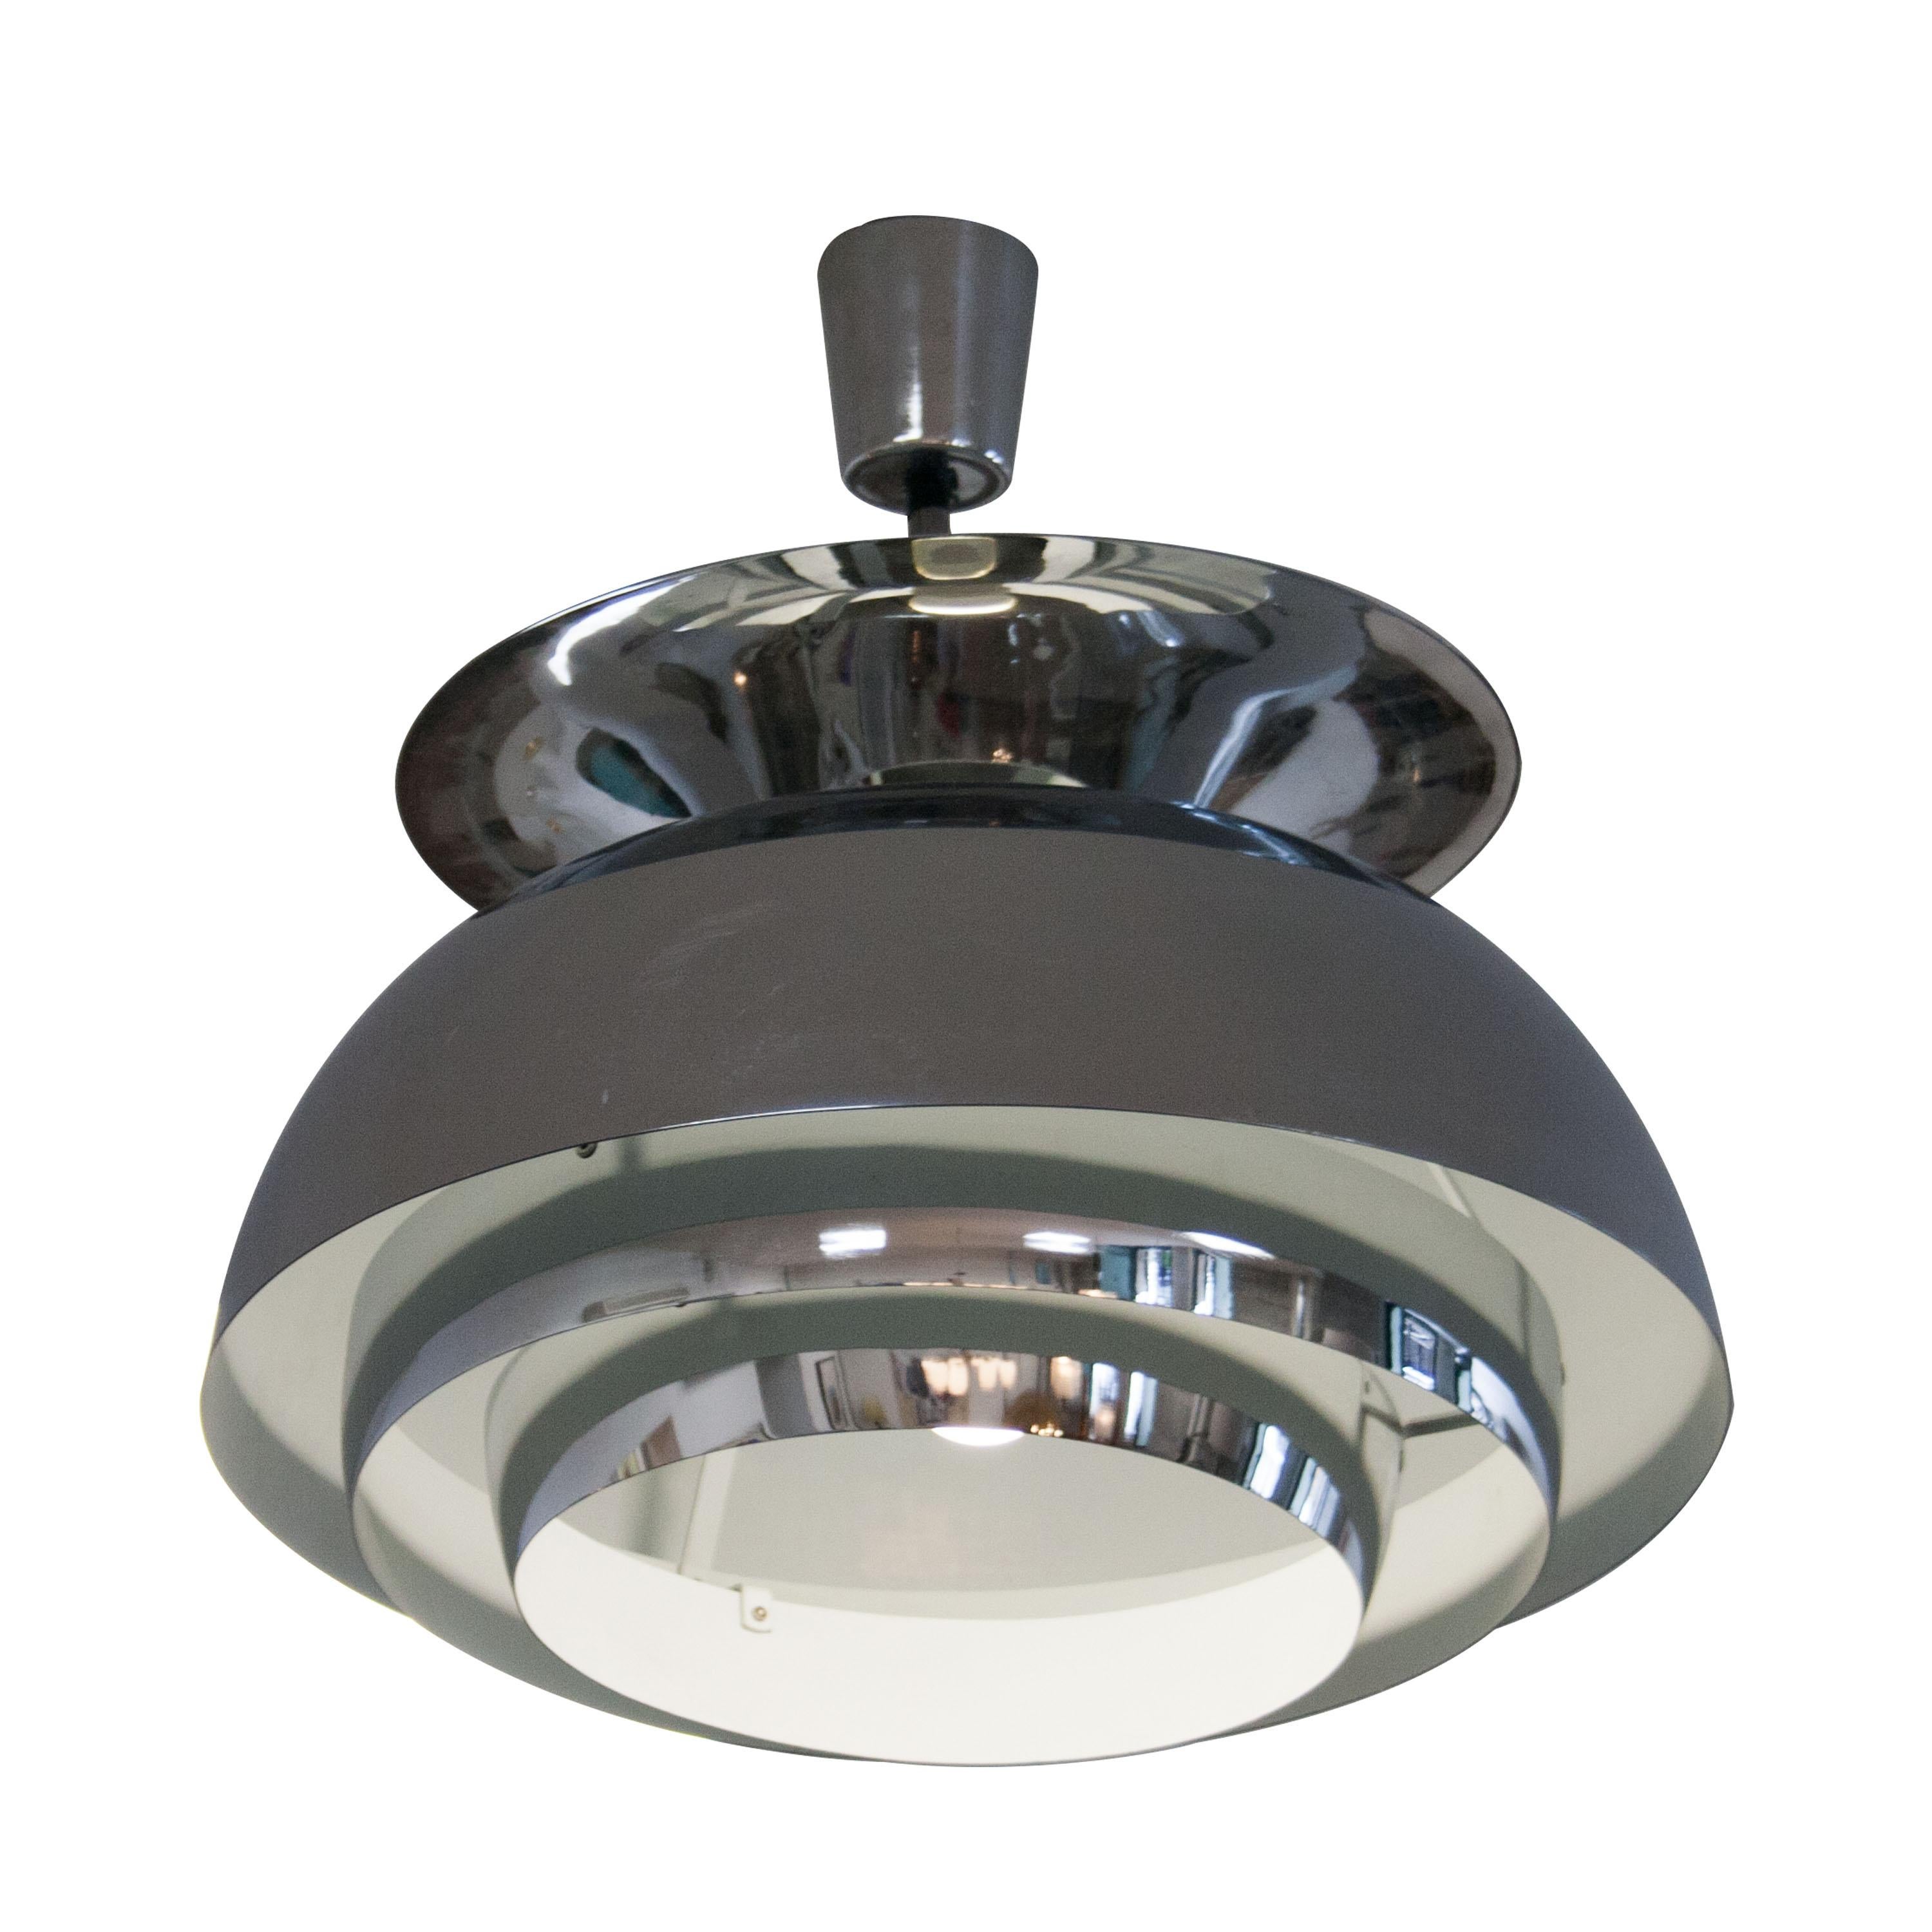 Italian chromed ceiling lamp. Made of chromed steel with white lacquered interior. One light point.